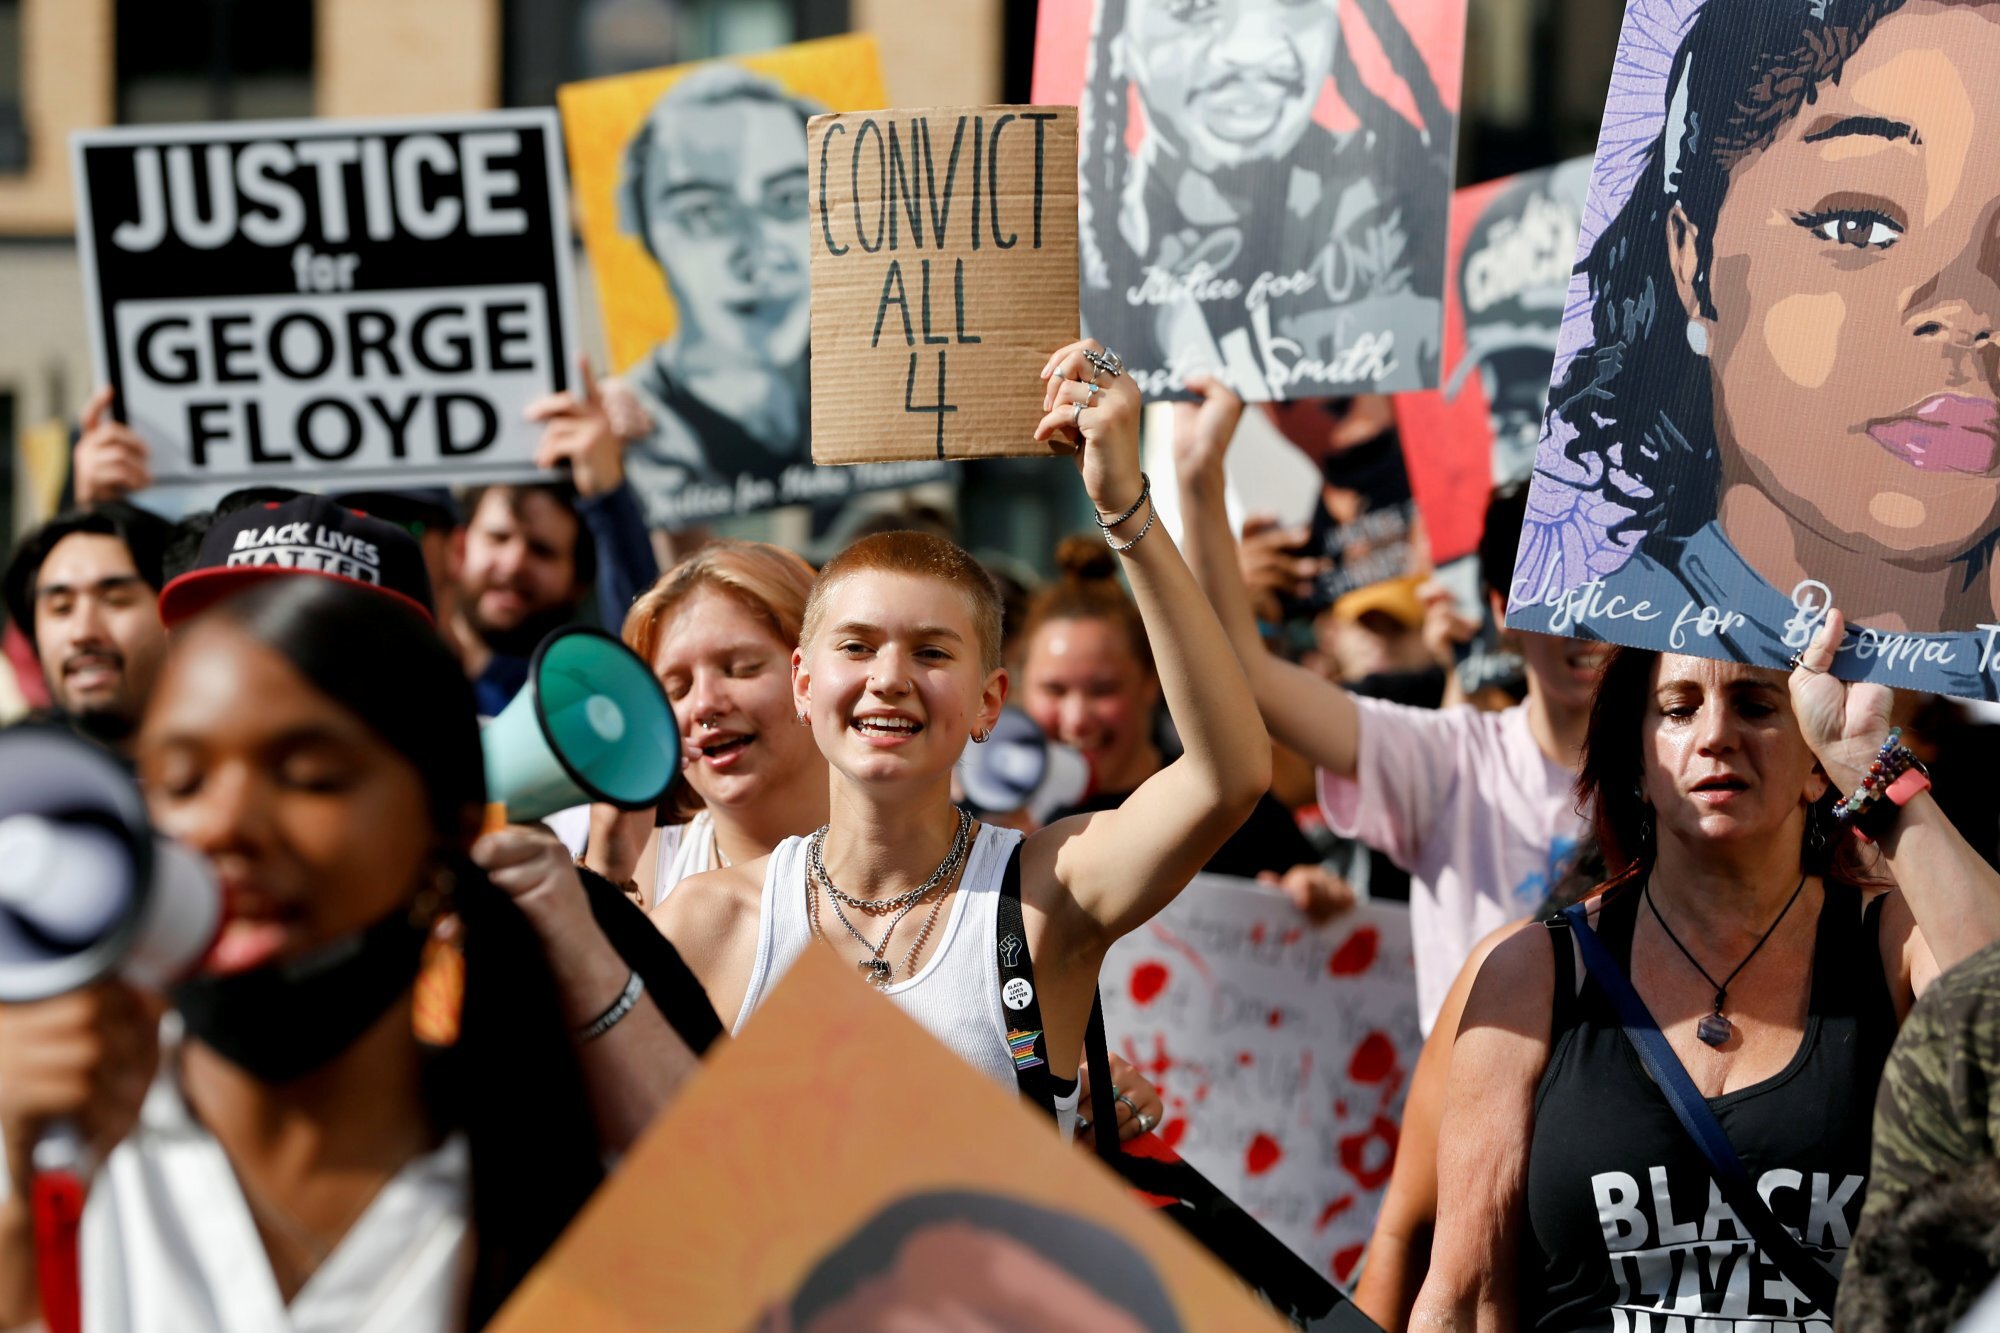 The 2020 protests over the killing of George Floyd appear to have been a turning point for America, writes Chandran Nair. Photo: Reuters